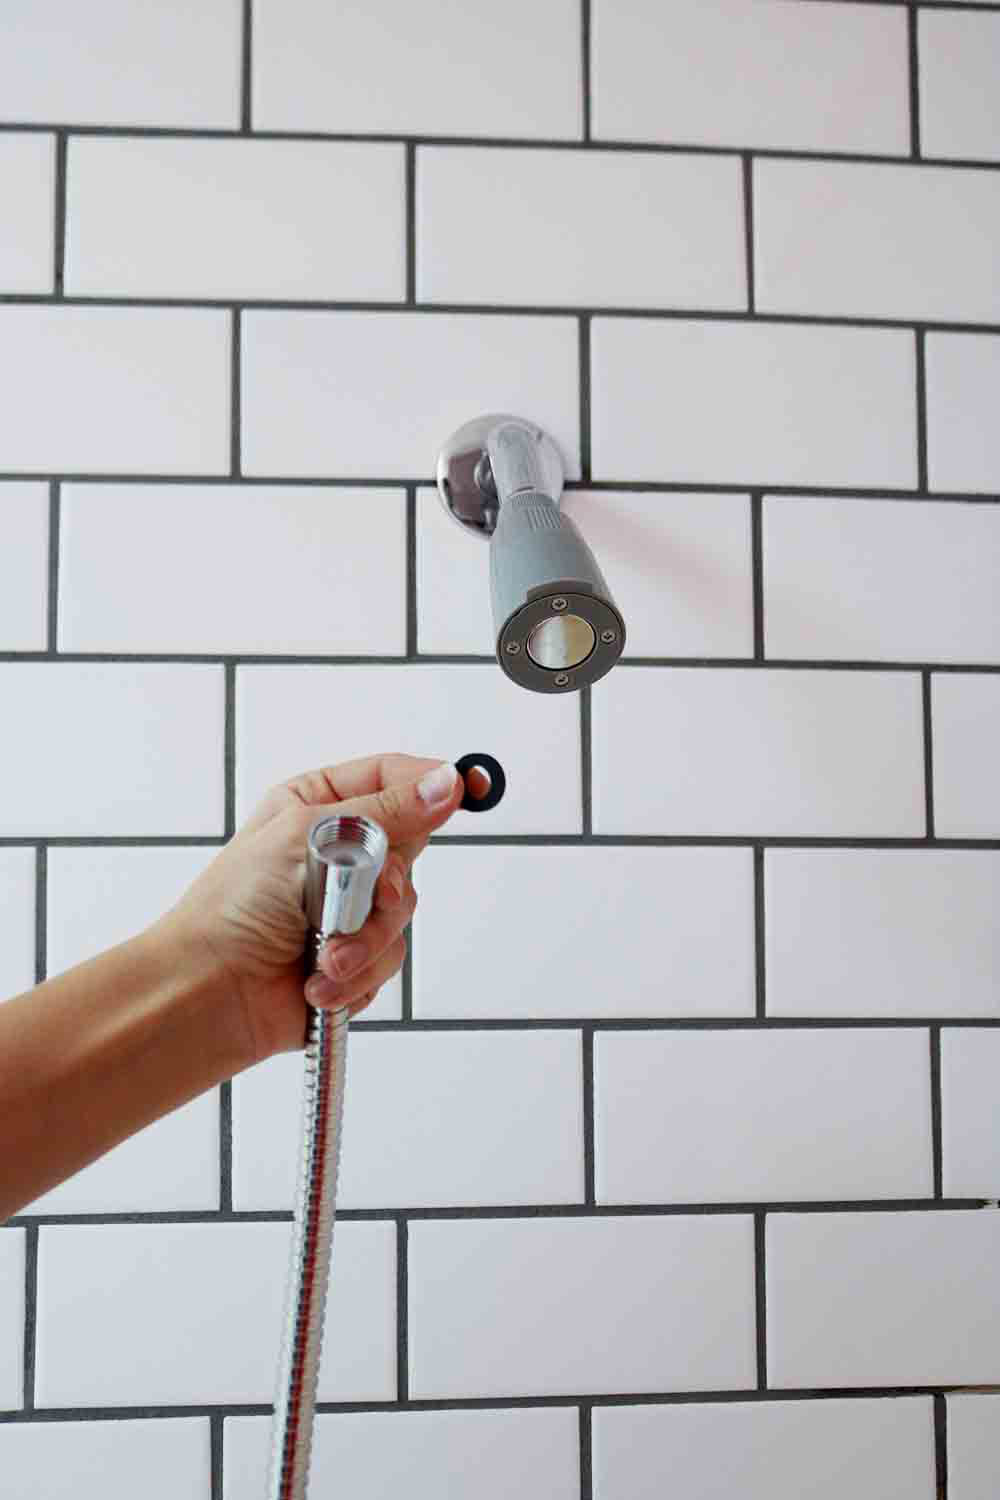 A person attaching a new shower head base onto a wall.